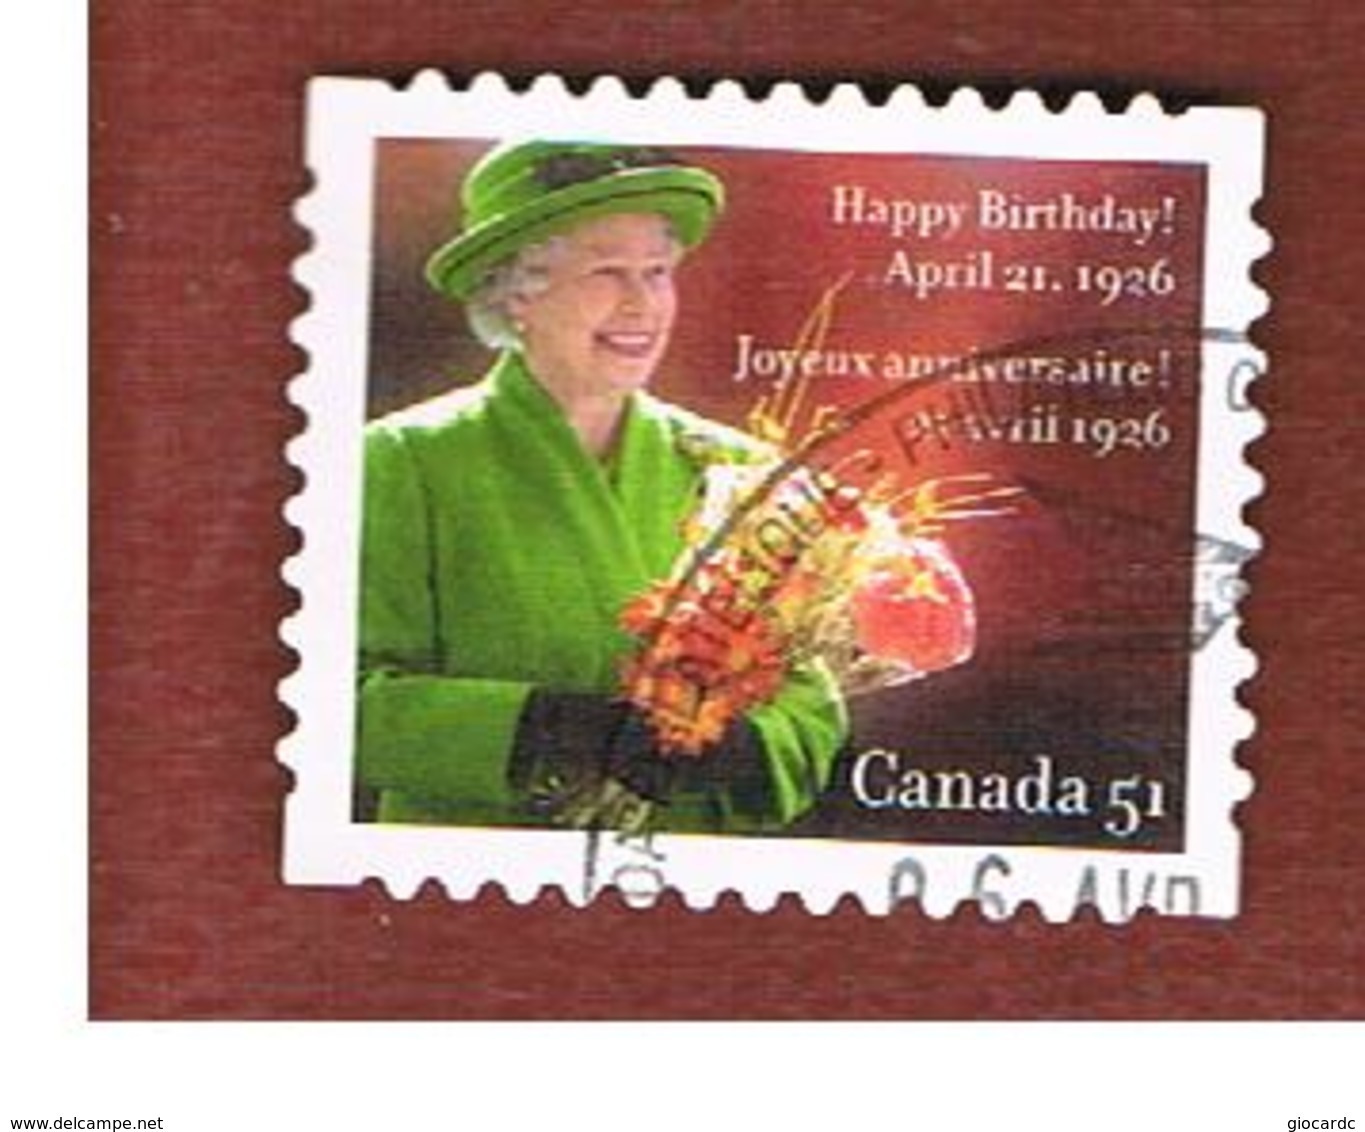 CANADA   -  SG 2381  -  2006 QUEEN ELIZABETH II BIRTHDAY        -      USED - Used Stamps